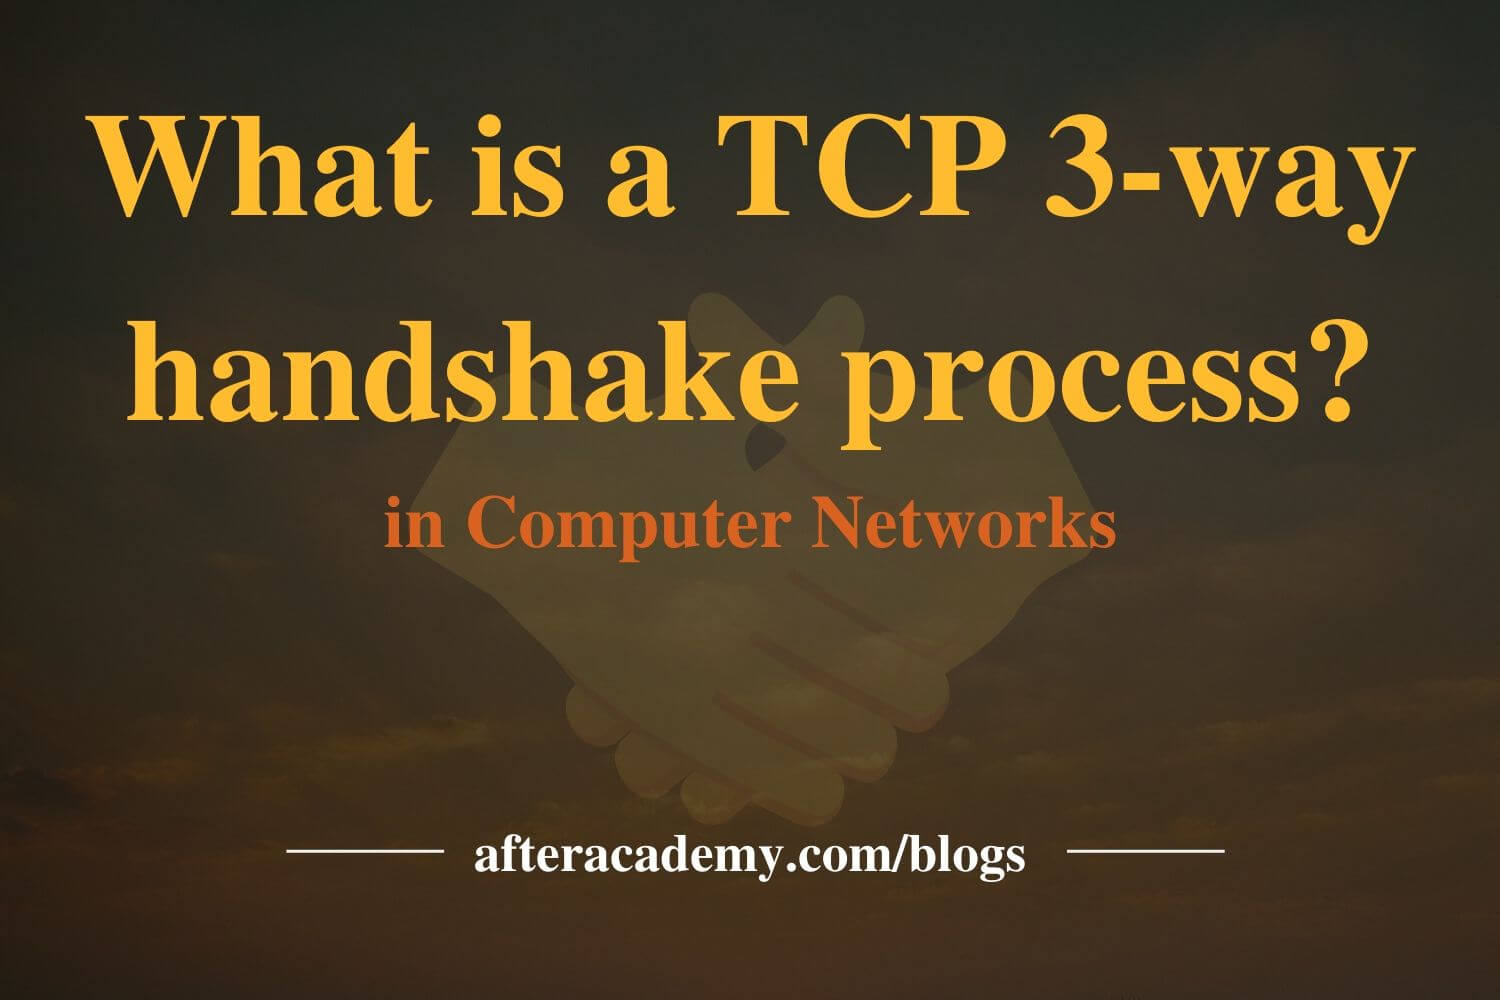 What is a TCP 3-way handshake process?